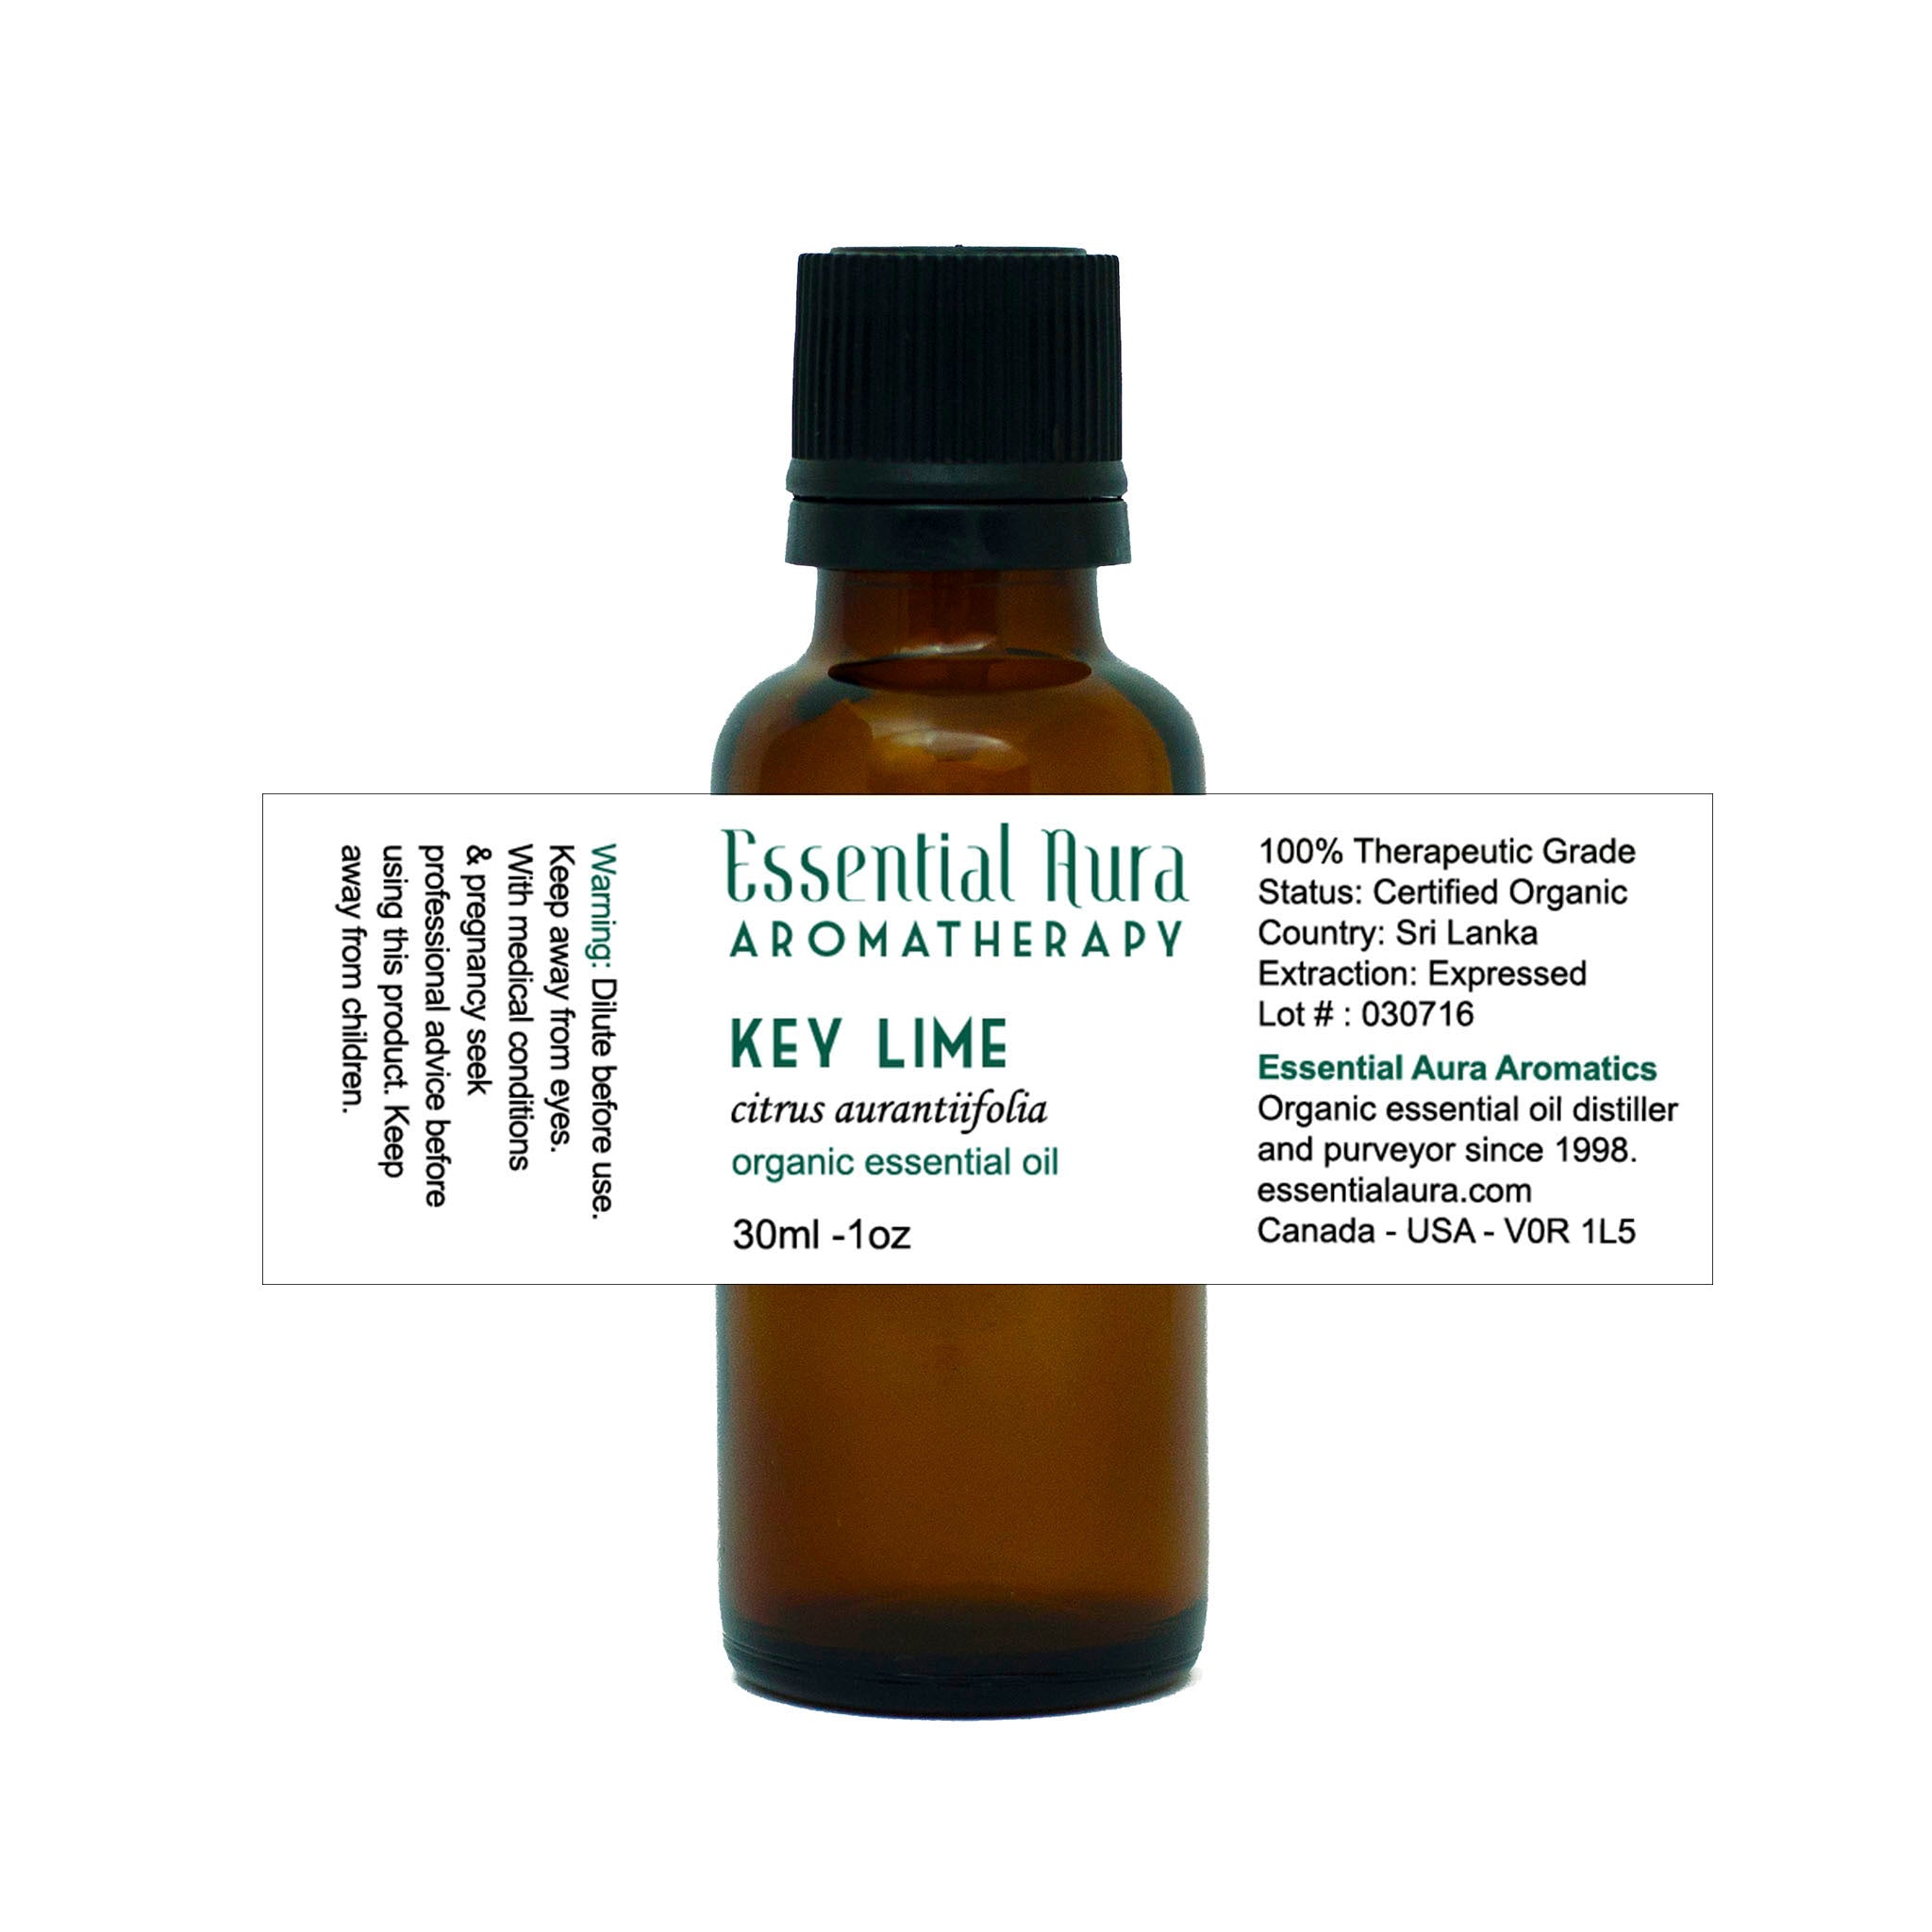 bottle of Key Lime Organic Essential Oil